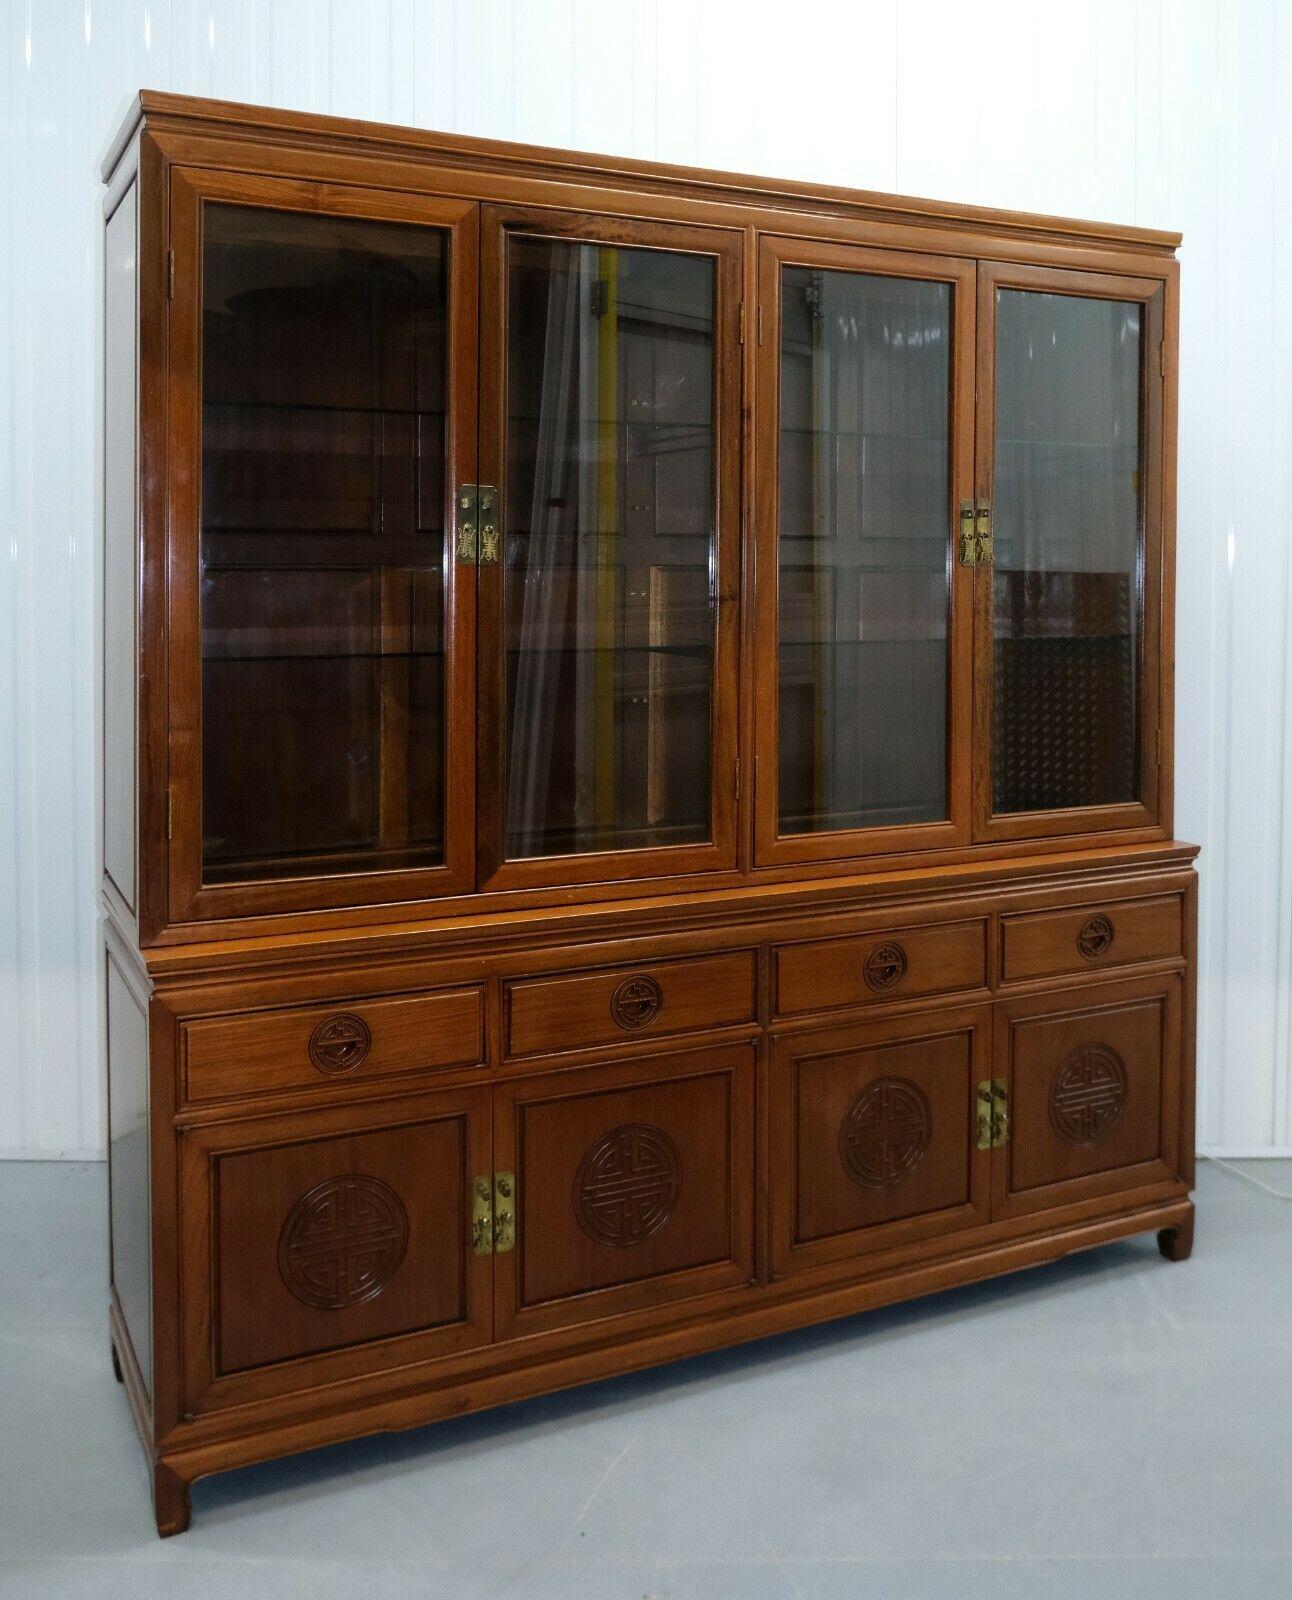 20th Century Stunning Chinese Hardwood Sideboard with Glass Shelves Carving Details & Lights